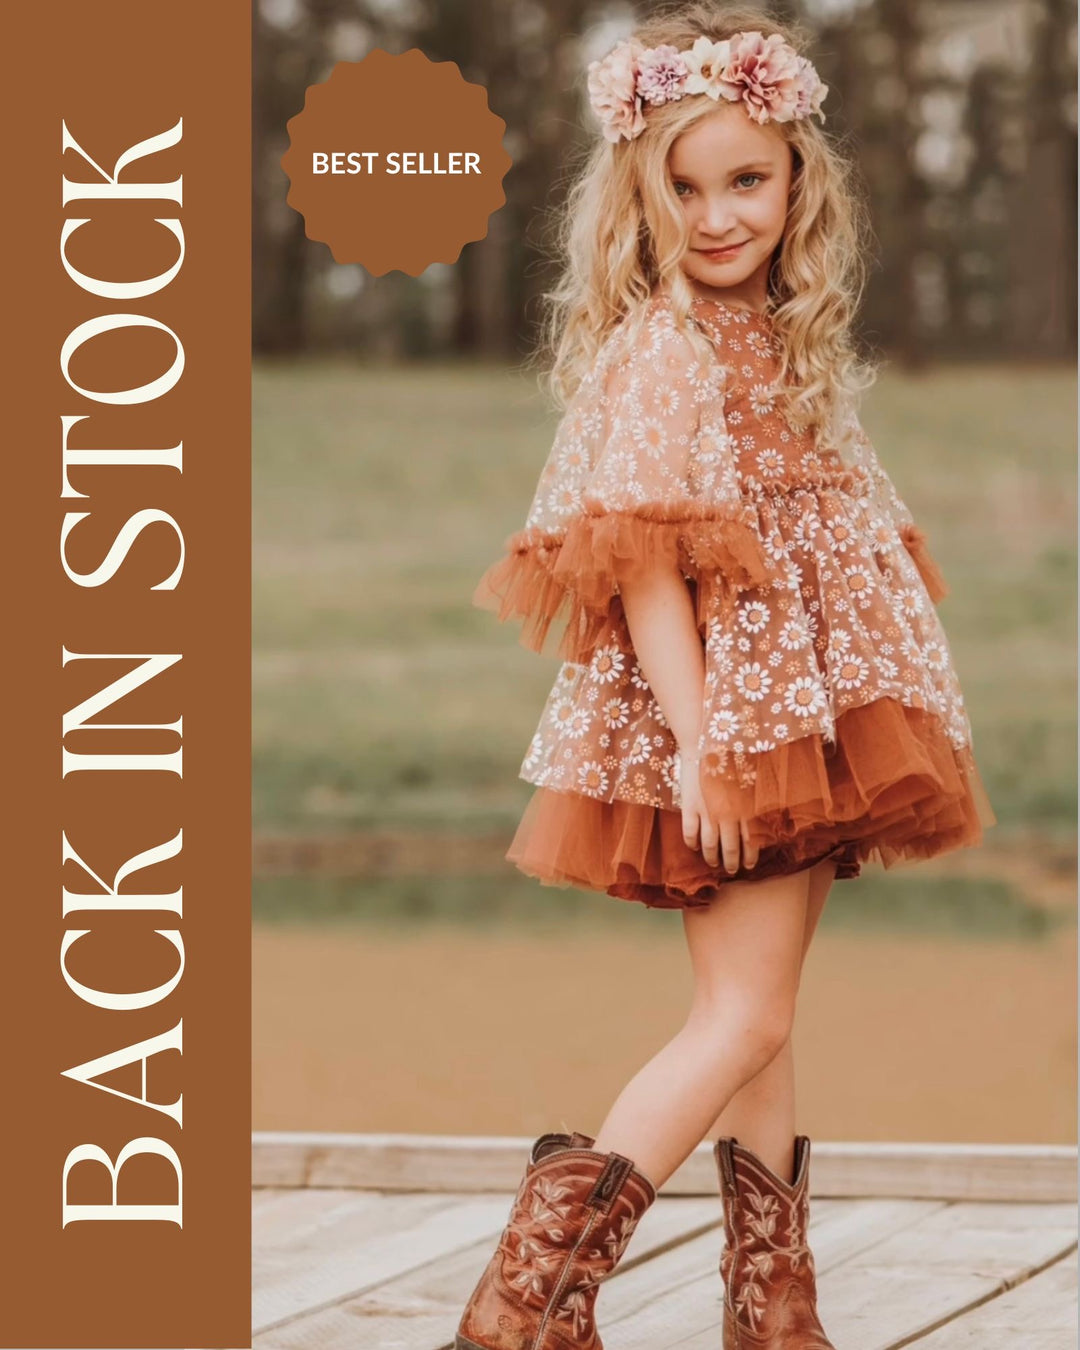 Best Seller "Toffee Daisy" is Back in Stock!